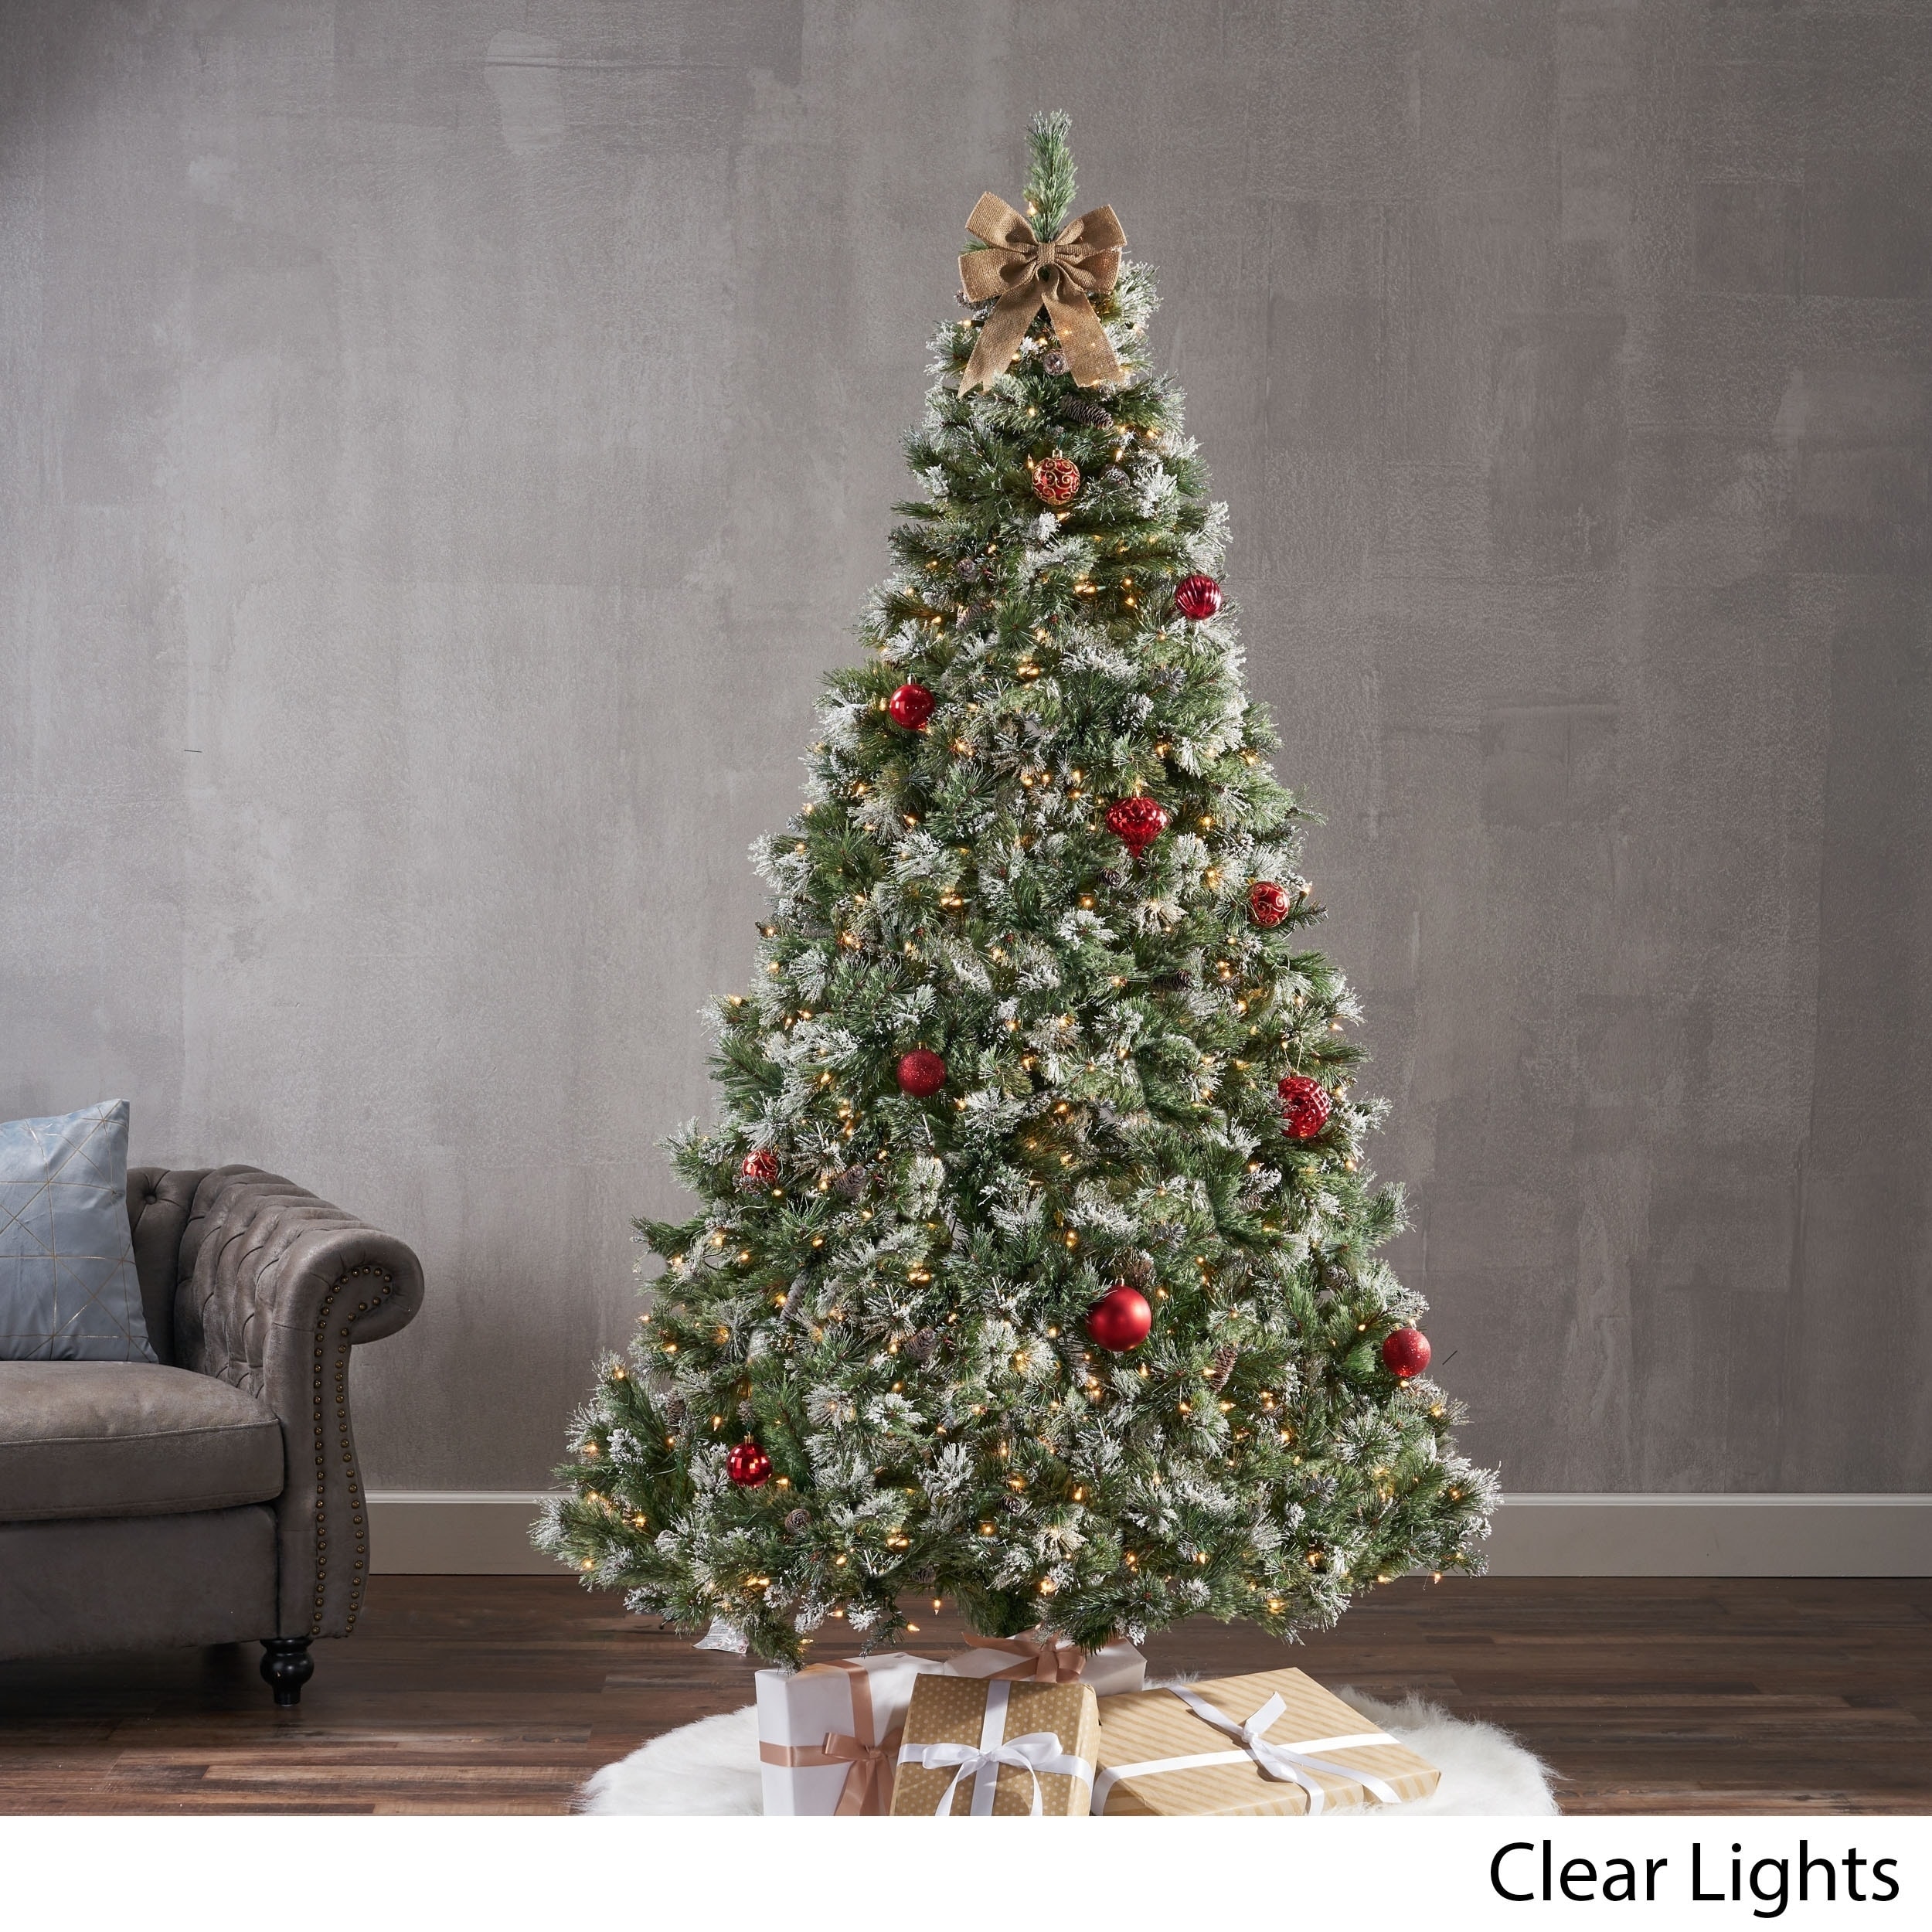 where to buy a good artificial christmas tree